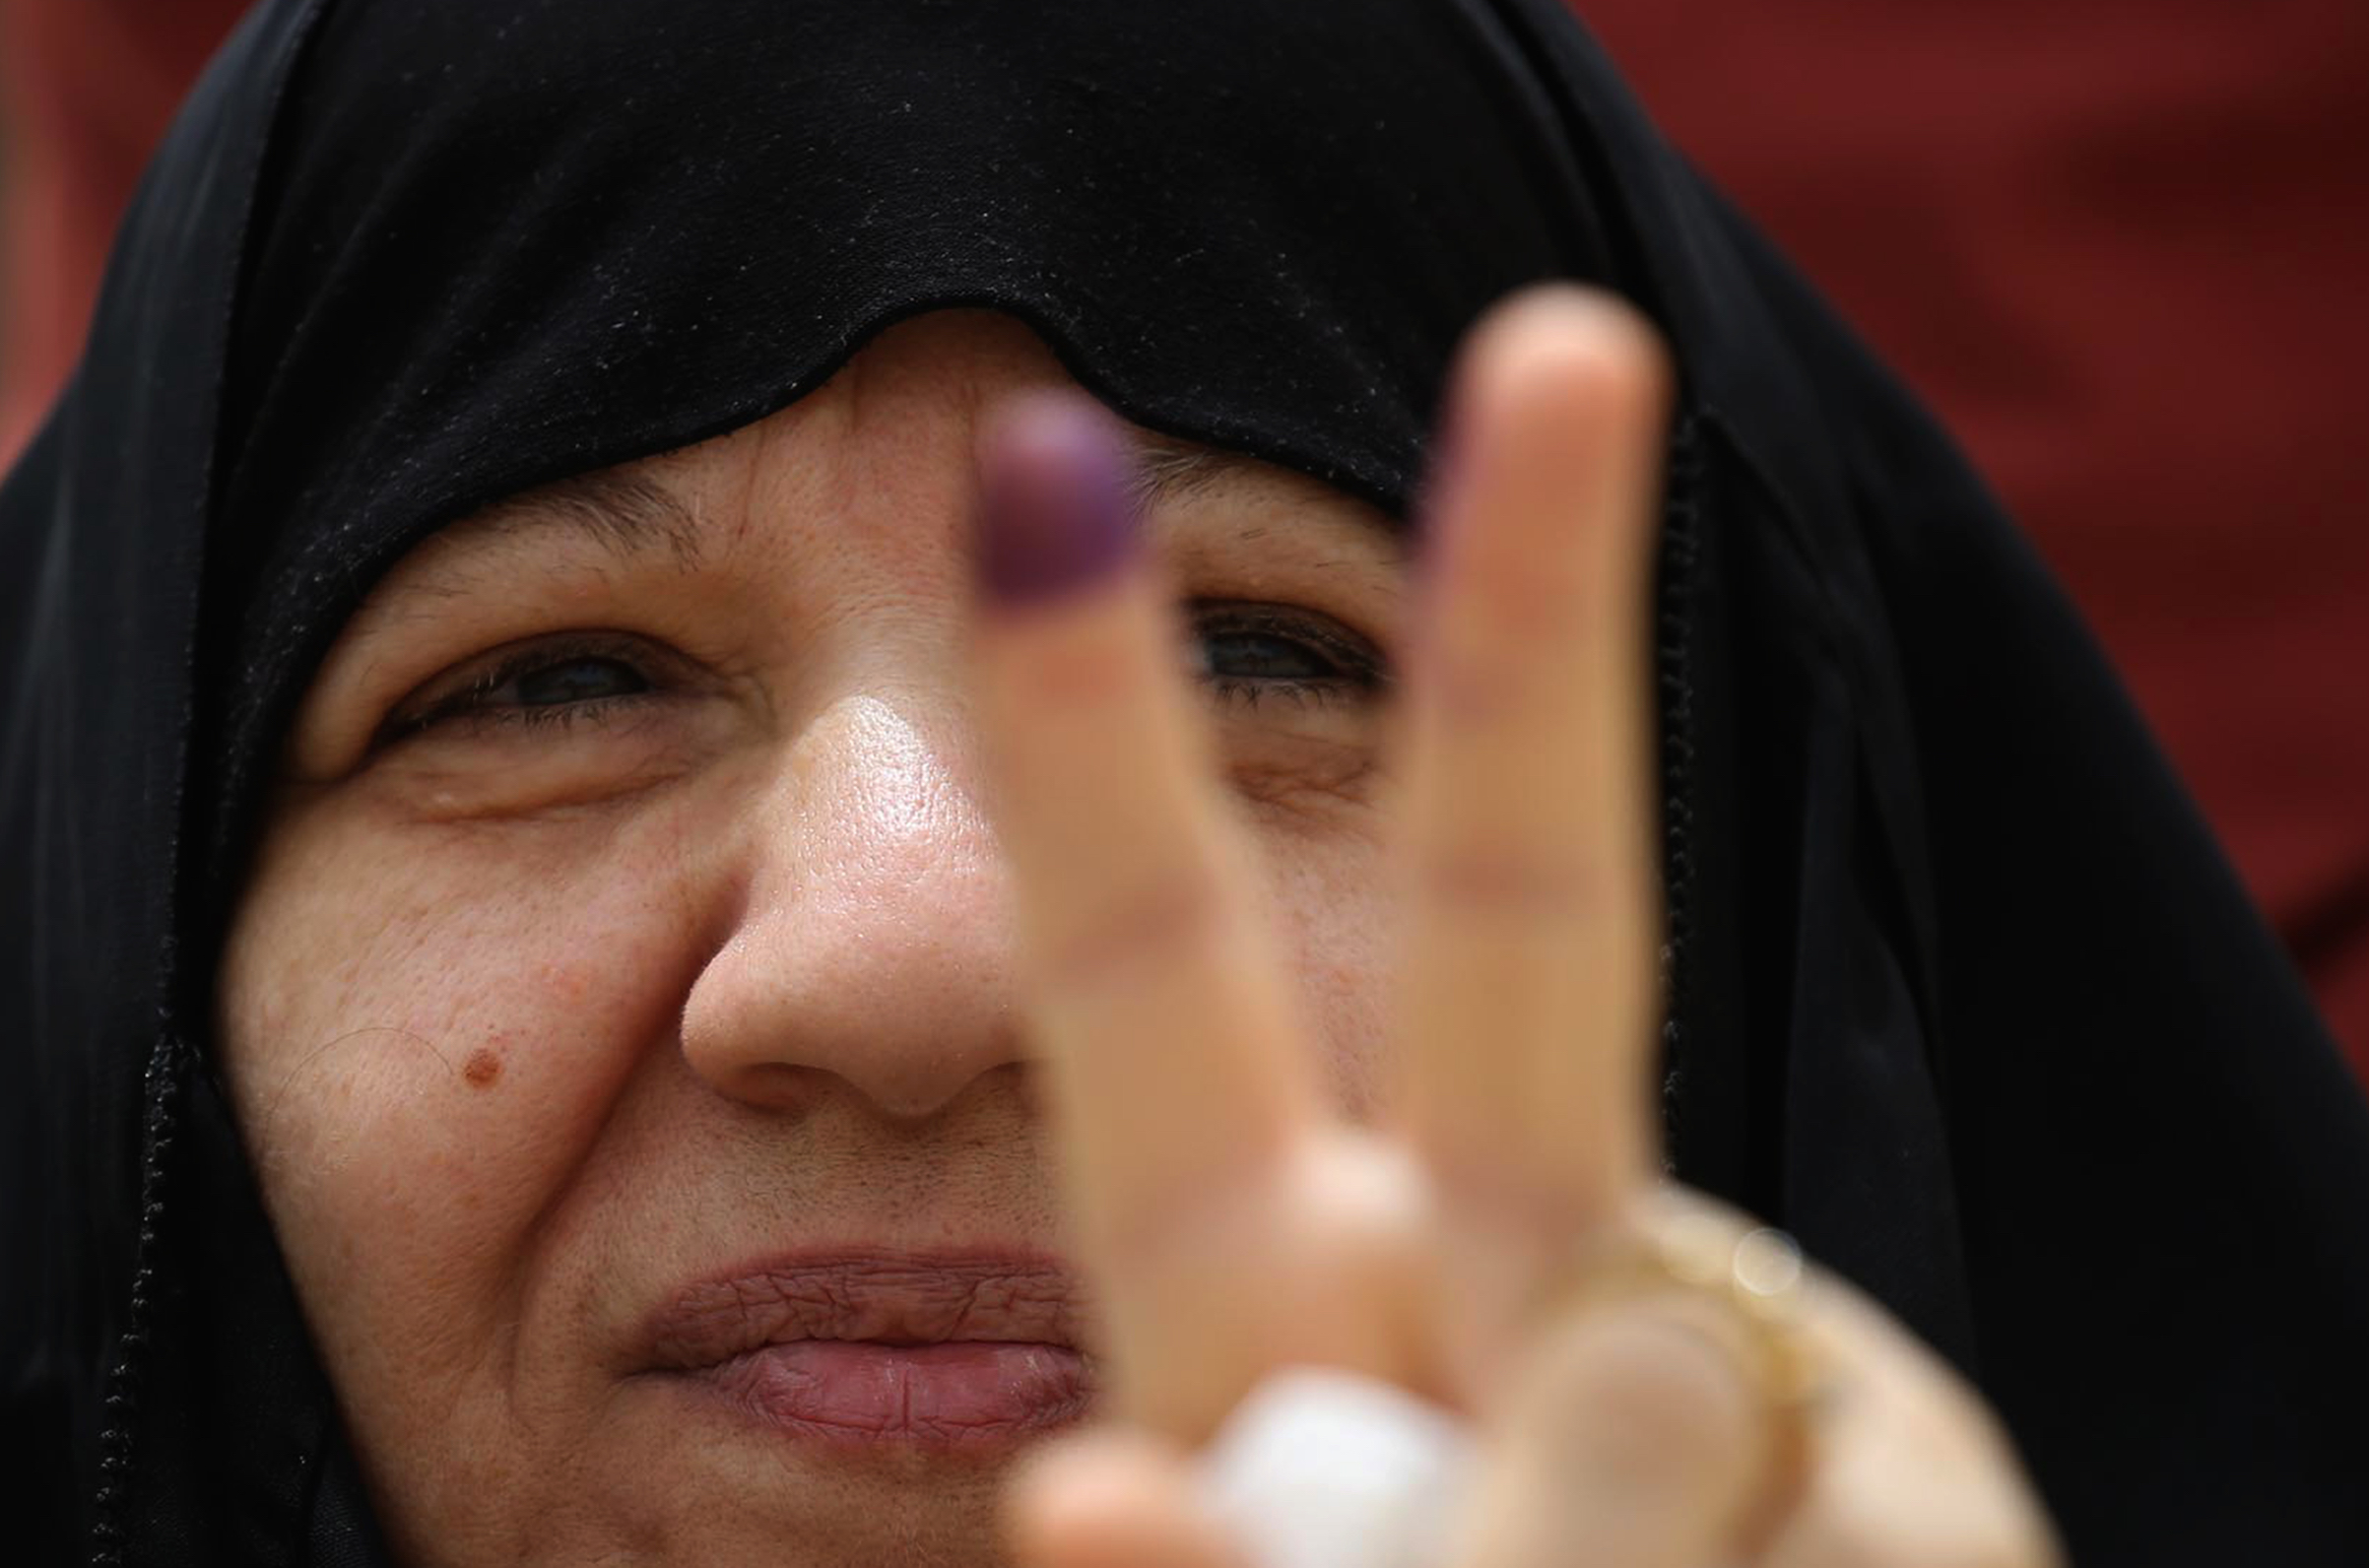 An Iraqi woman voter flashes the victory gesture with her ink-stained index finger at a poll station in the holy city of Karbala on May 12, 2018. (Mohammed Sawaf—AFP/Getty Images)